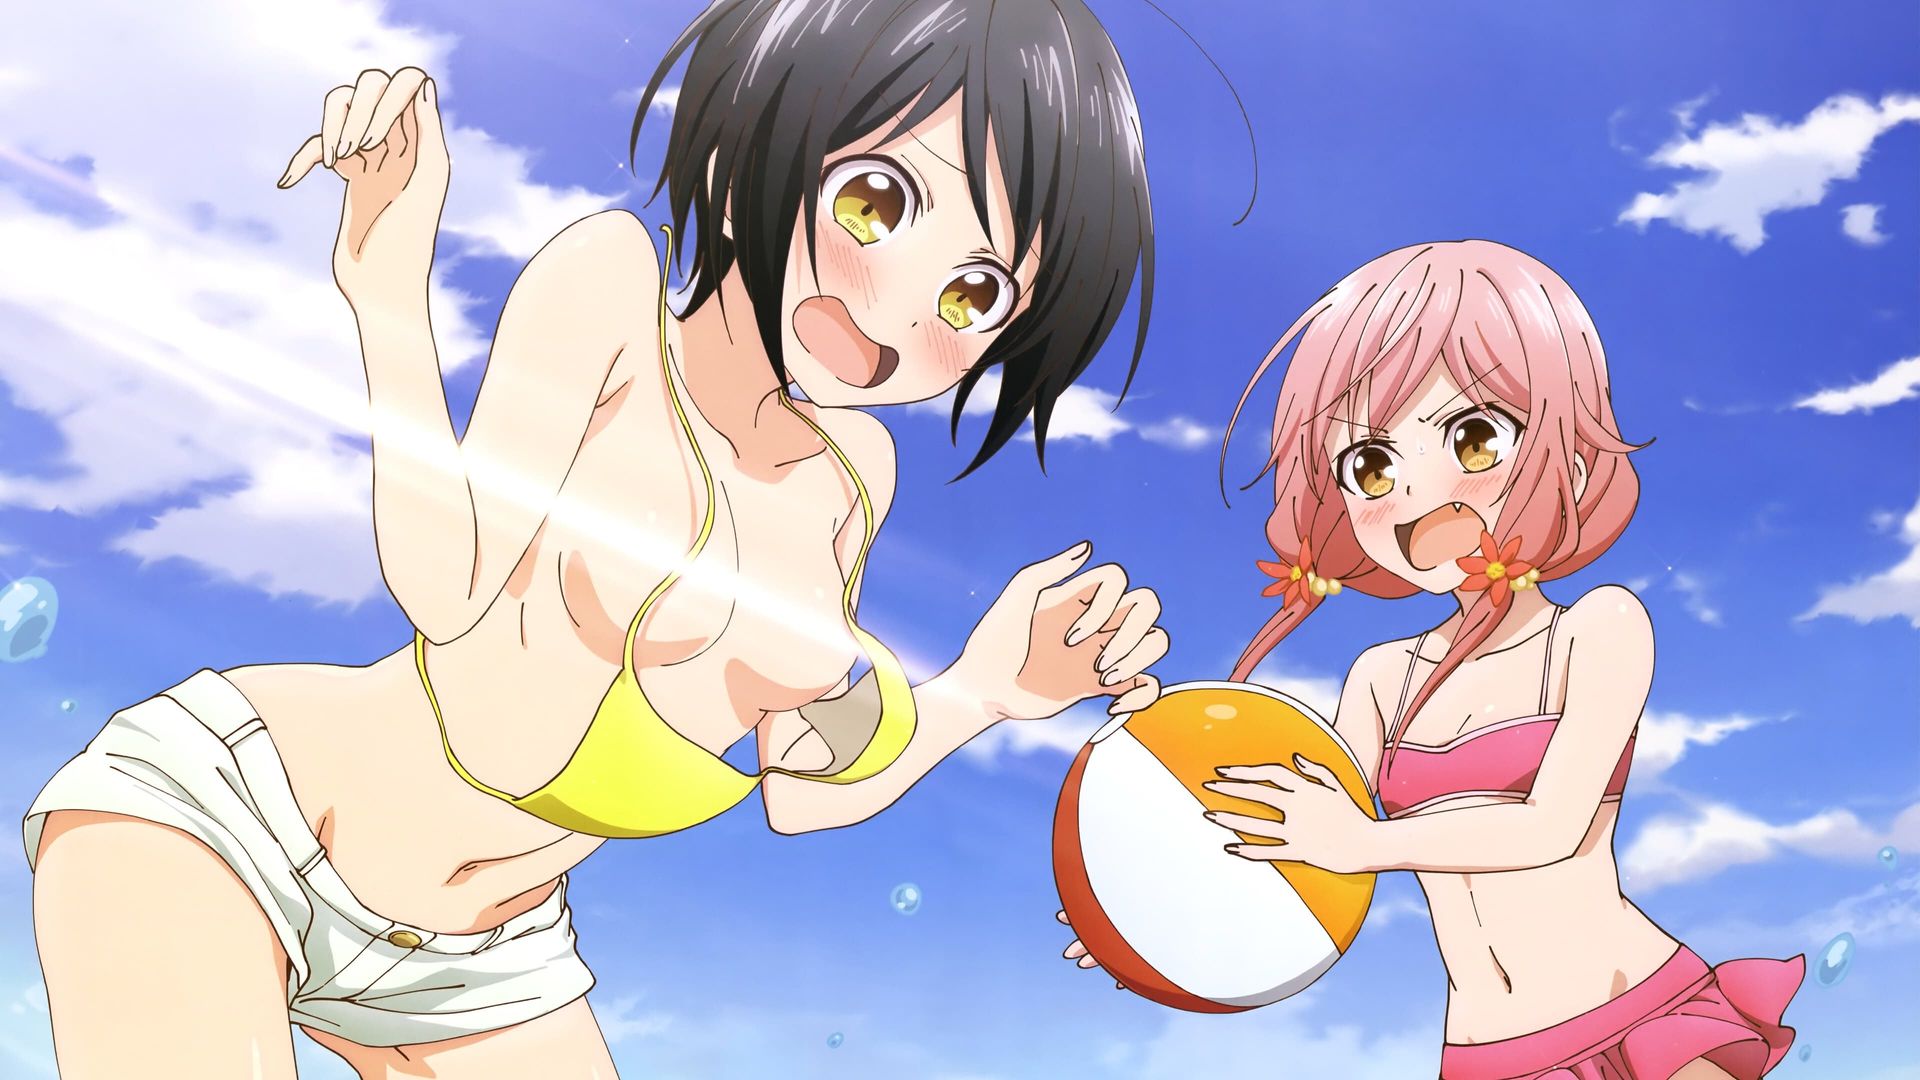 Love To-LIE-Angle Hot Springs and Ping Pong - Watch on Crunchyroll